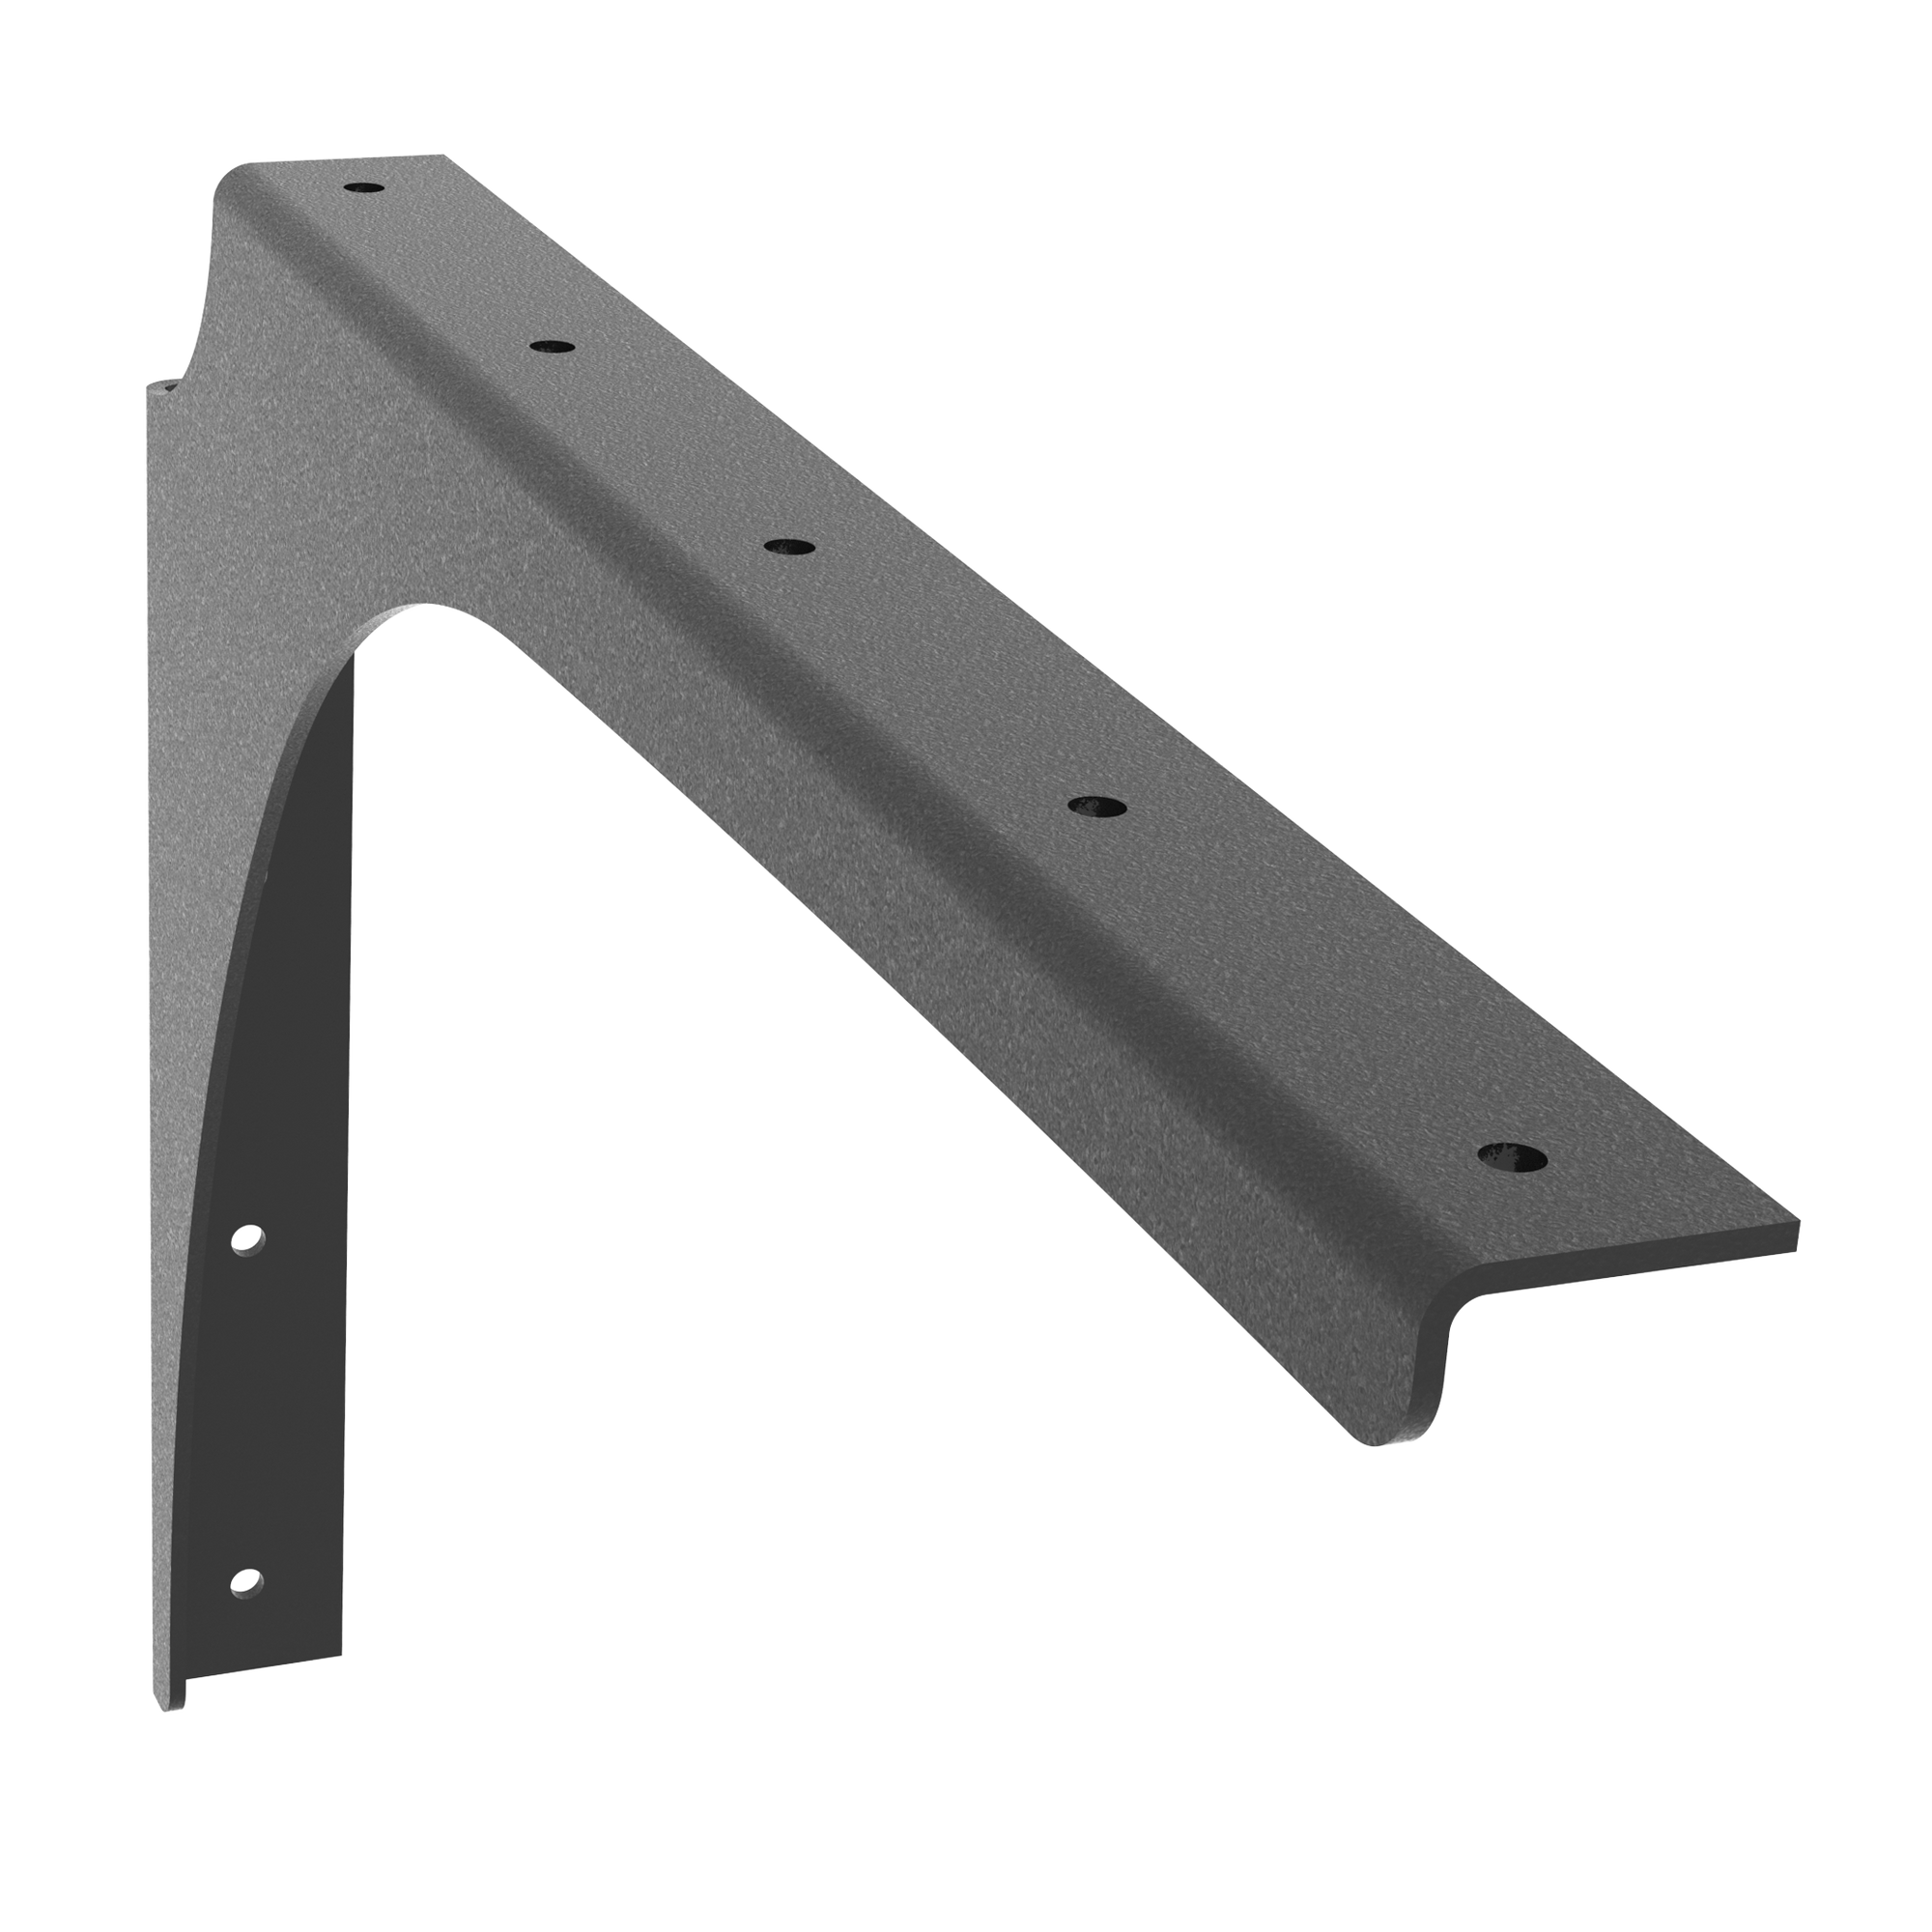 Universal Commercial Support Bracket - 18" x 12" Left Handed with Black Powder Coat Finish. Supports floating ADA-compliant vanities, desks, shelving, countertops, and more.